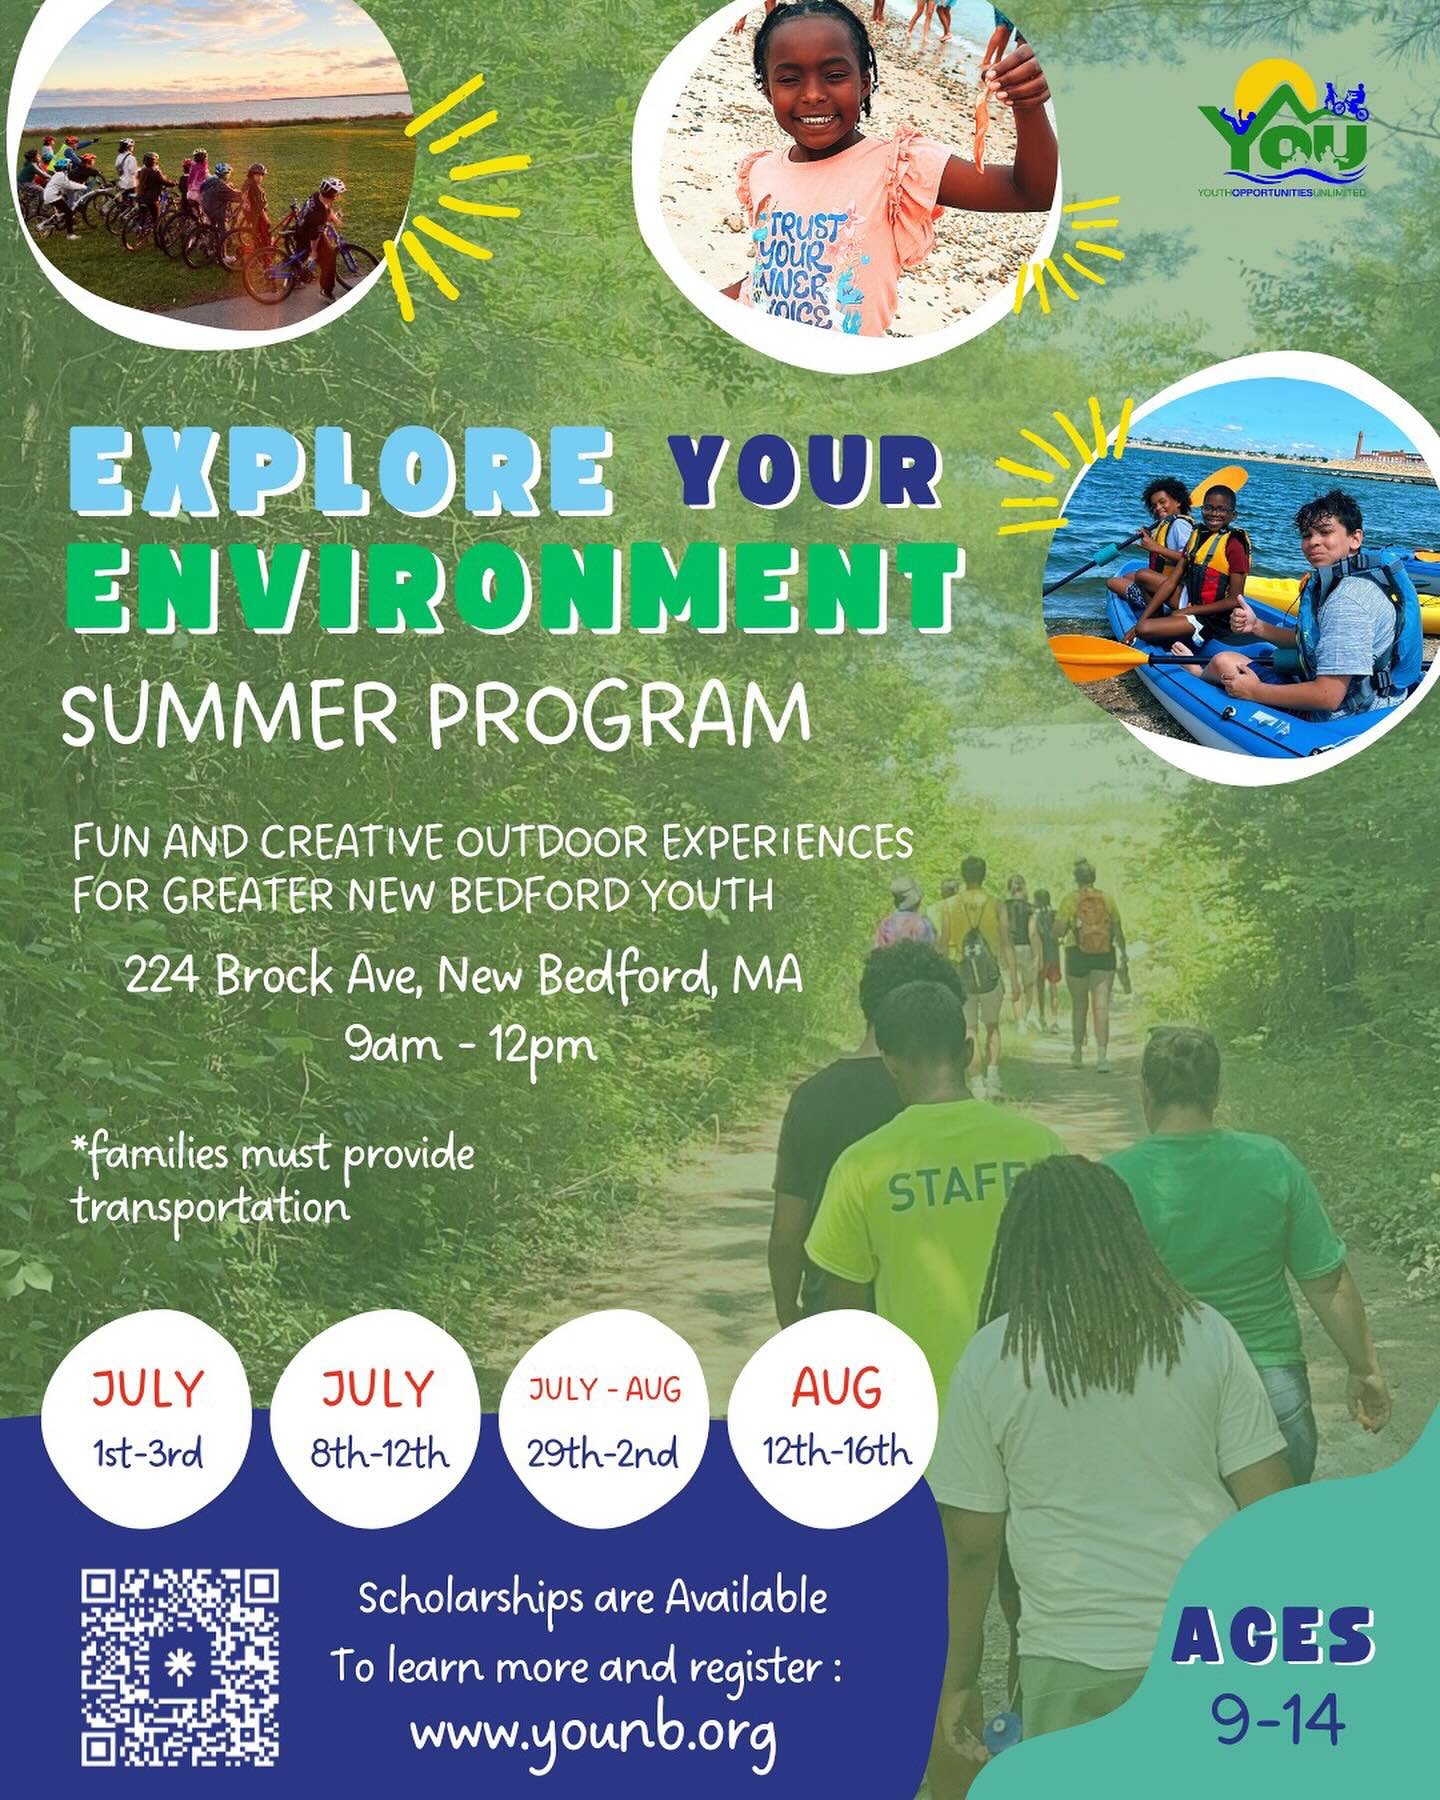 Summer is just around the corner! ☀️ Registration for our summer program is now open! Calling all Greater New Bedford youth aged 9-14 to join us for 4 weeks of biking adventures and exploring the great outdoors. To learn more and sign up today - clic